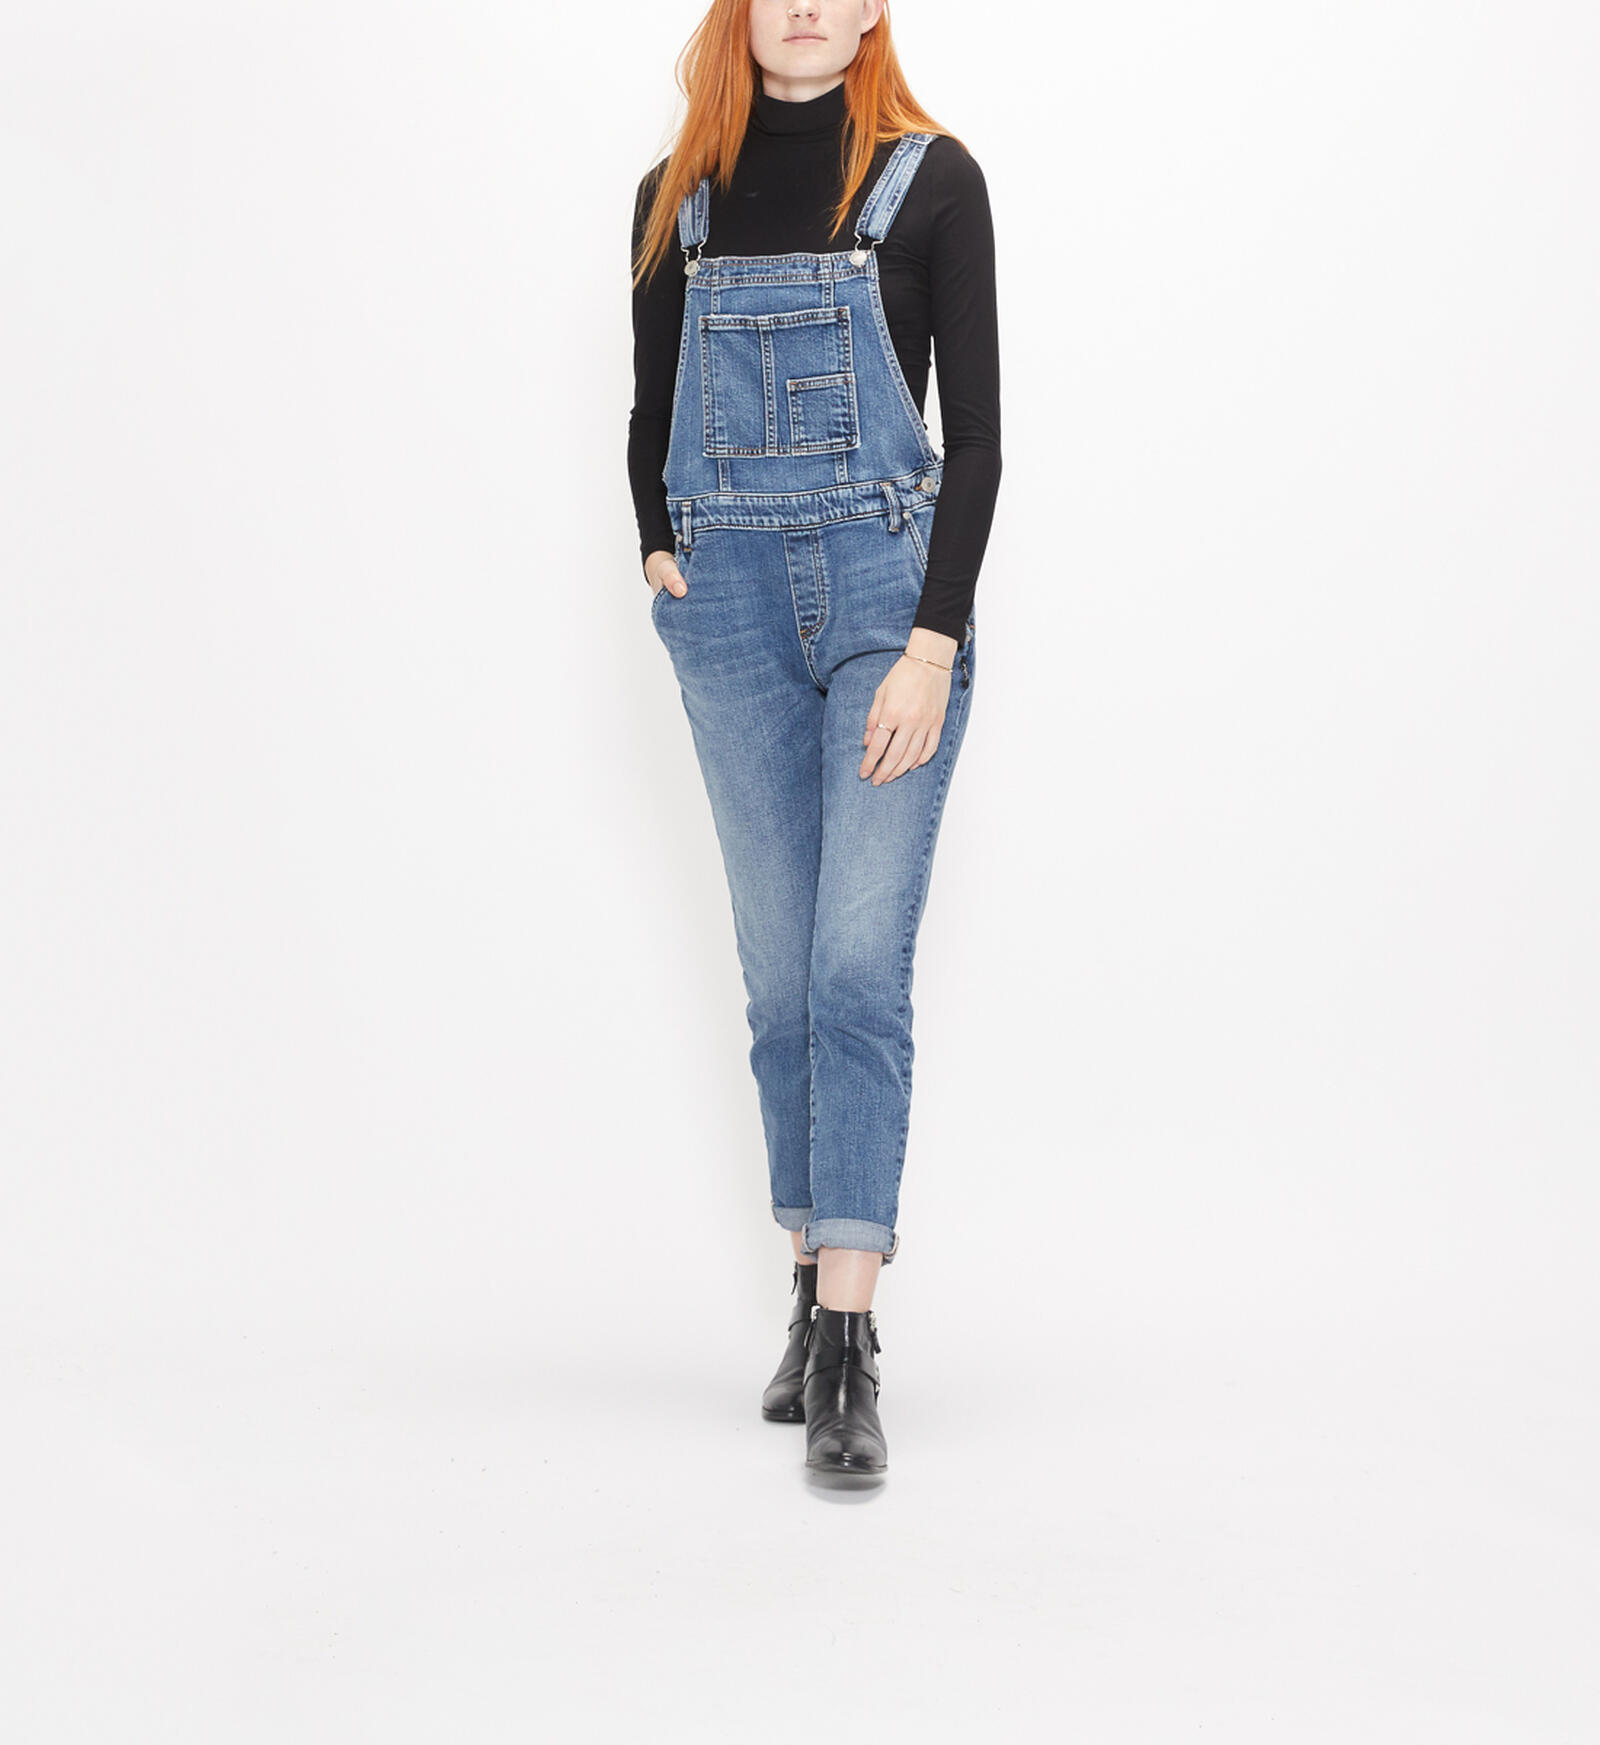 Buy Overalls Skinny Leg Jeans for USD 99.00 | Silver Jeans US New